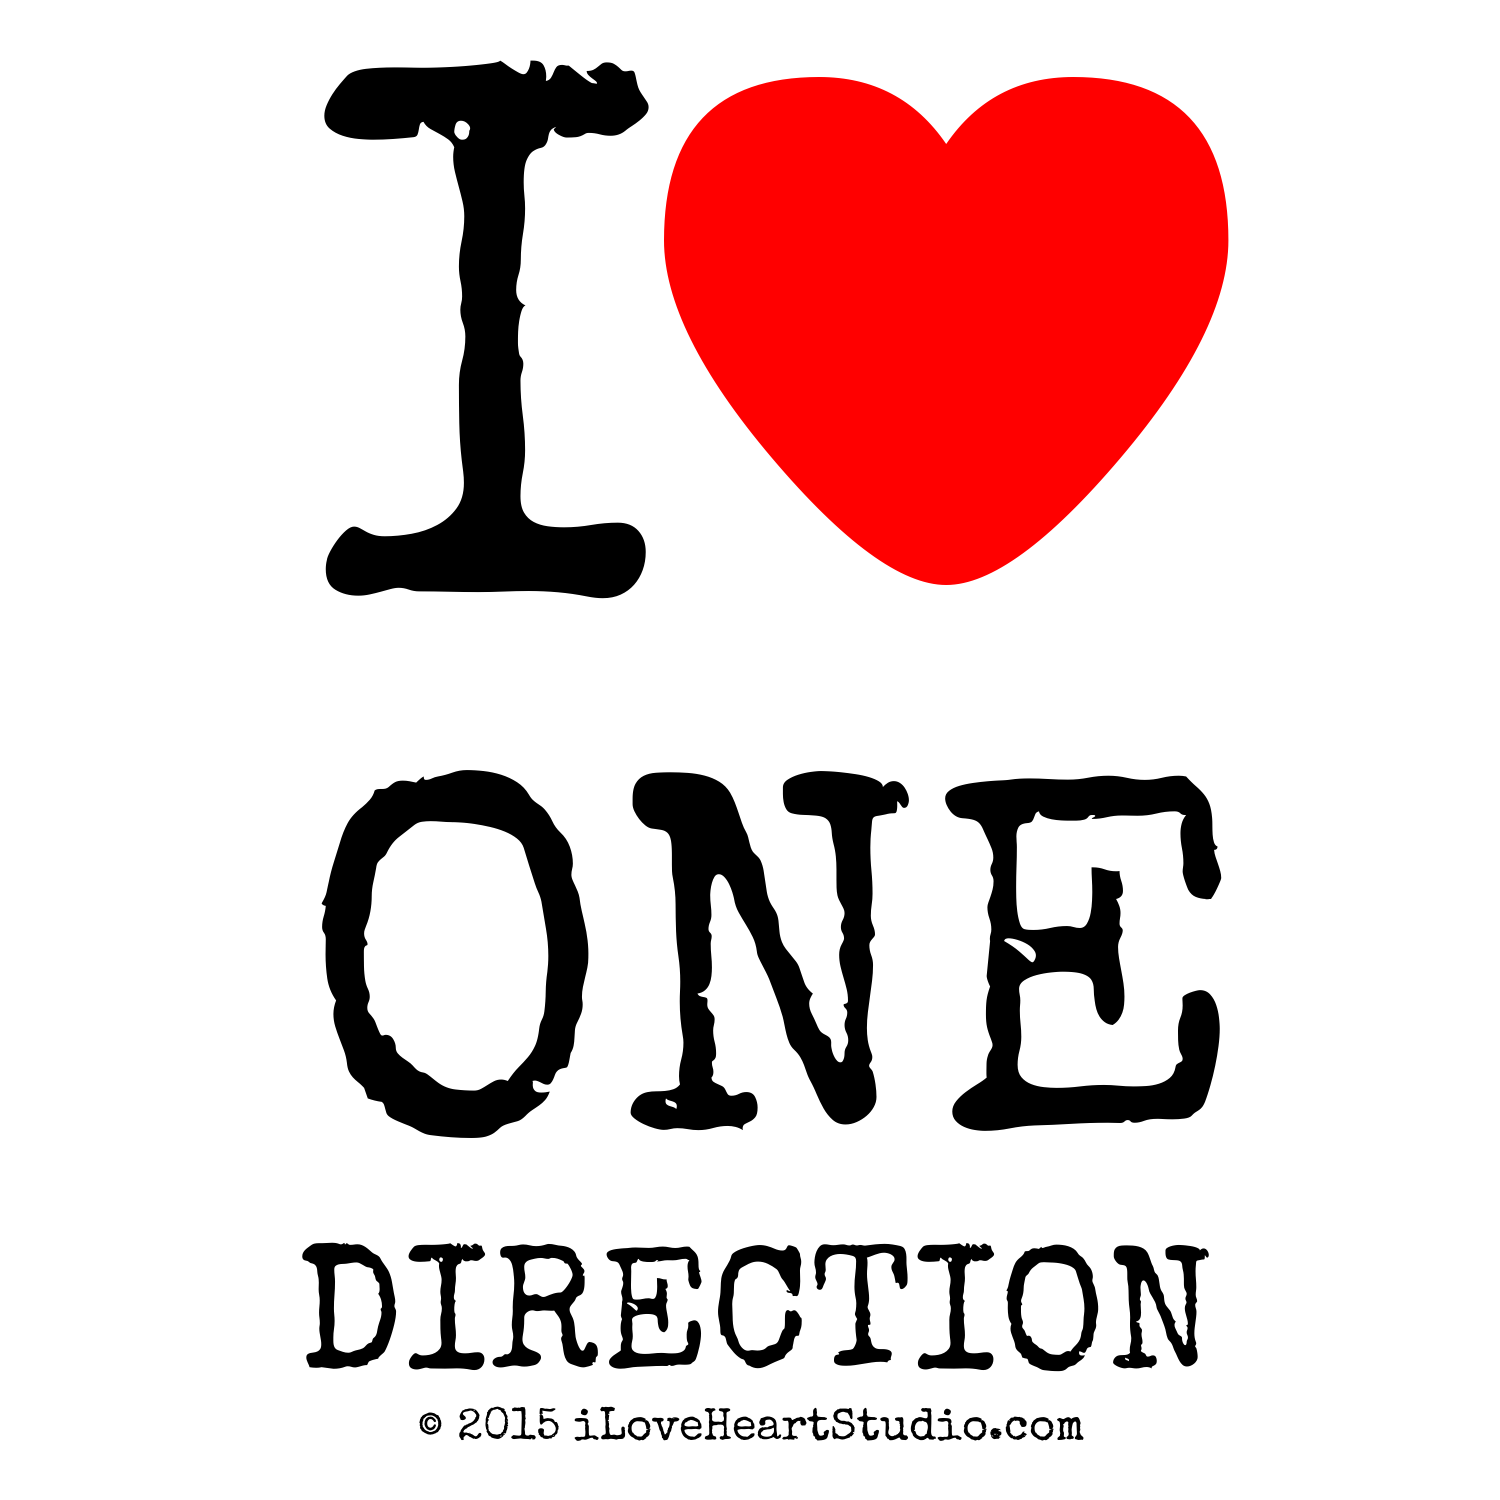 one addition | One direction logo, One direction, One direction photos